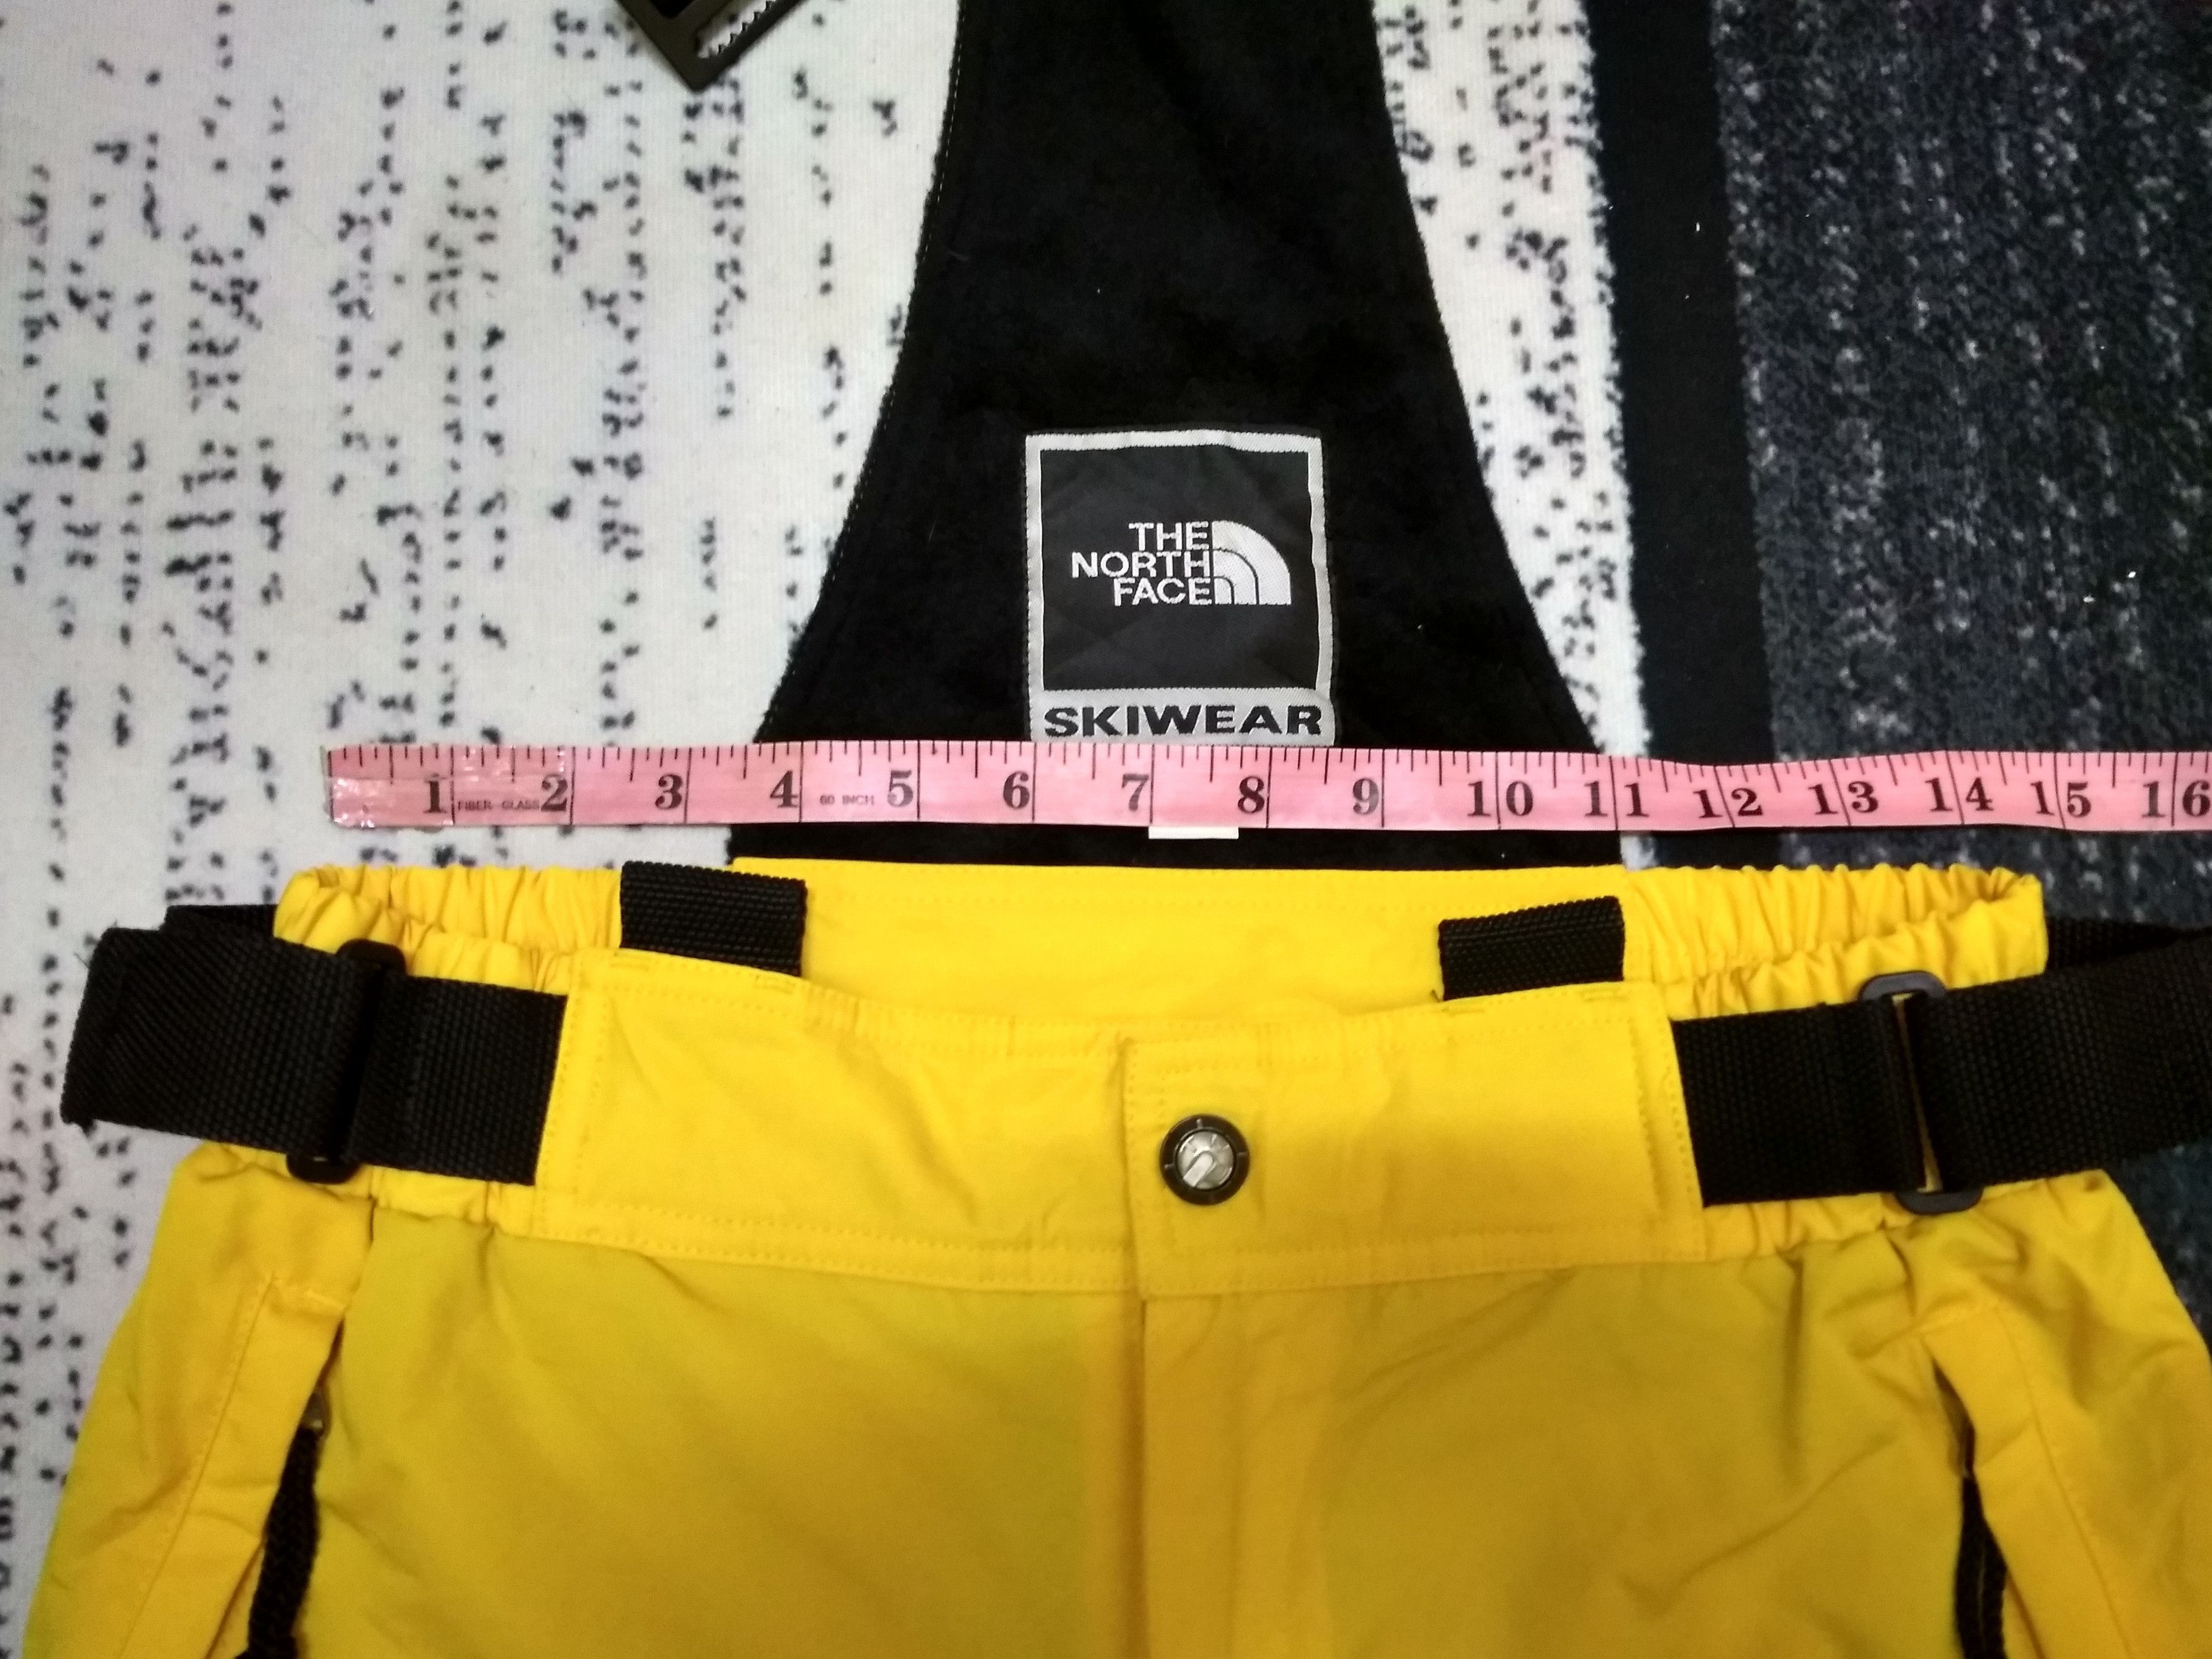 The North Face The North Face Overall Skiwear Size US 33 - 3 Thumbnail